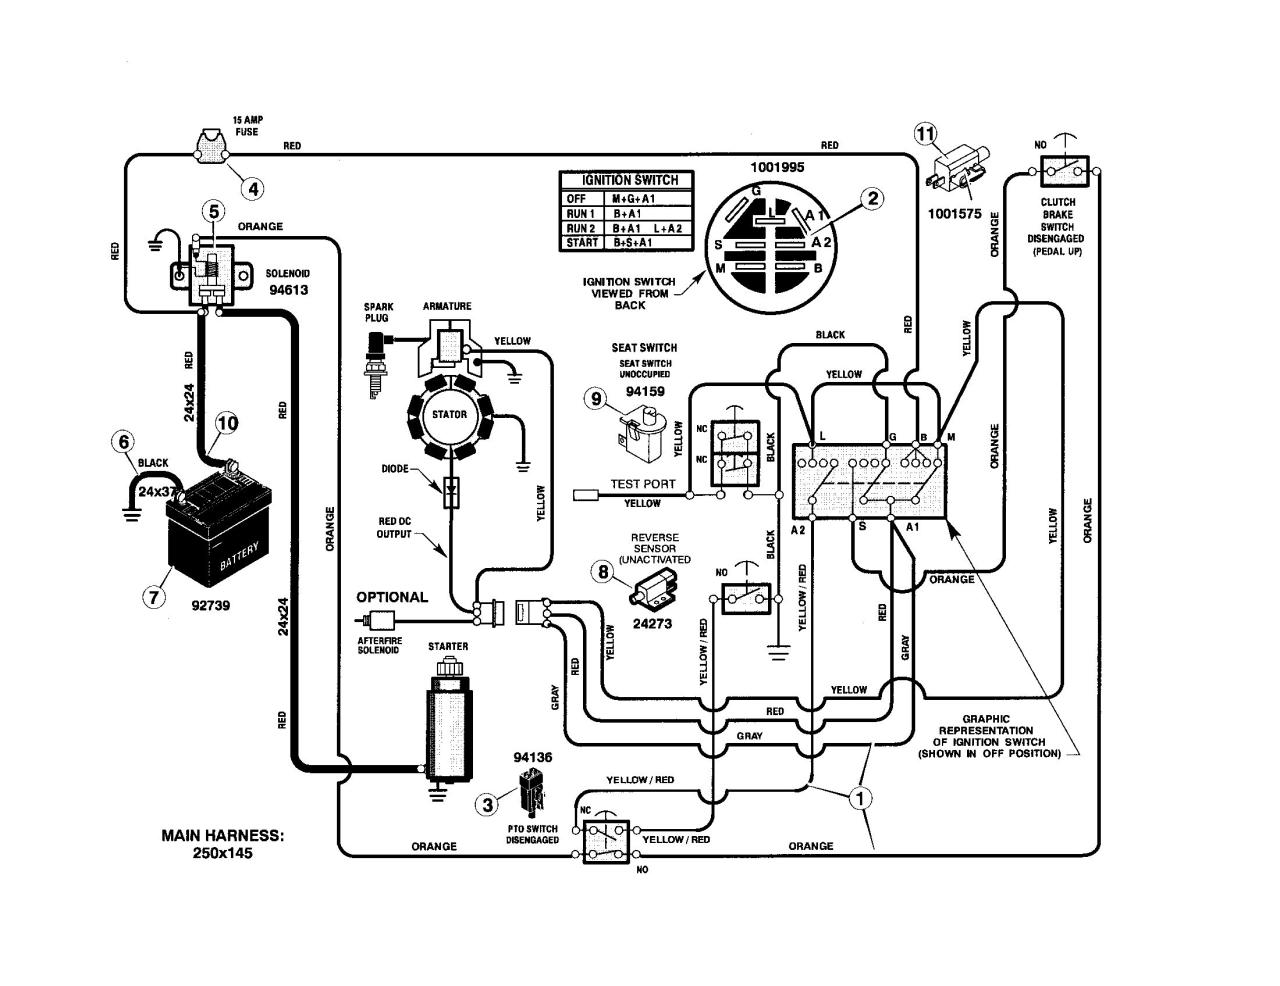 Wiring Diagram For Murray Riding Lawn Mower Cadician's Blog